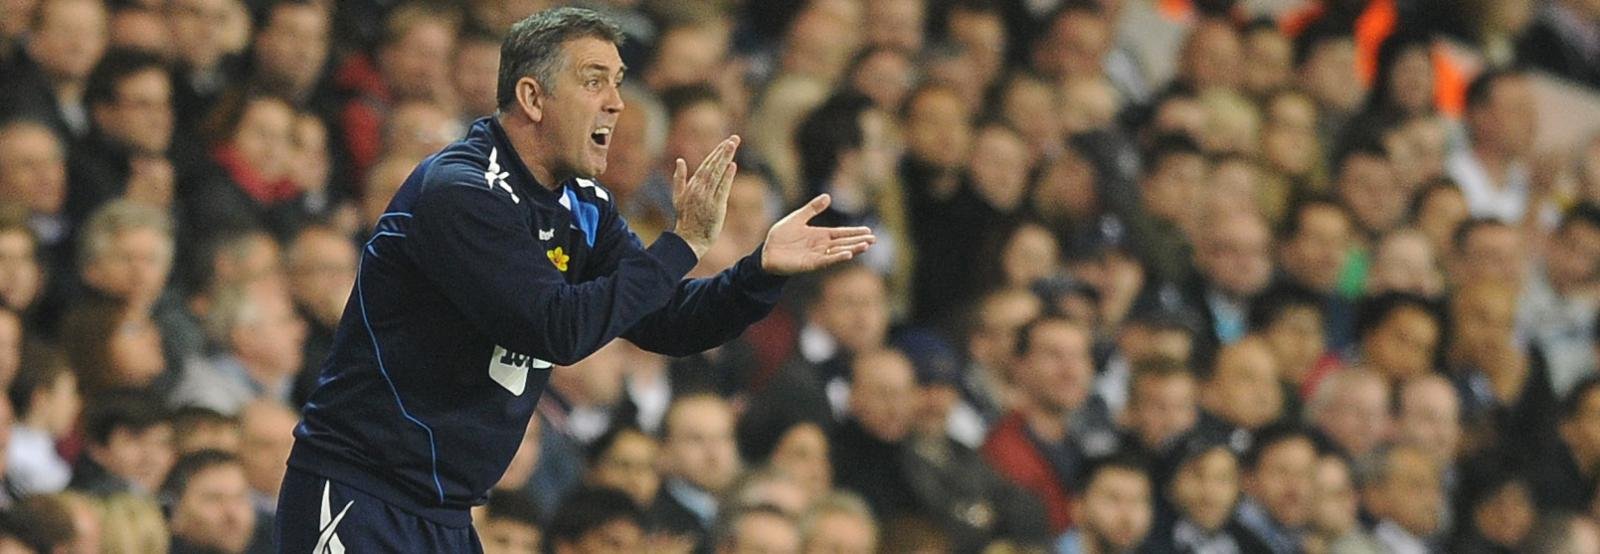 Blackburn Rovers appoint ex-Bolton and Wigan boss Owen Coyle as manager